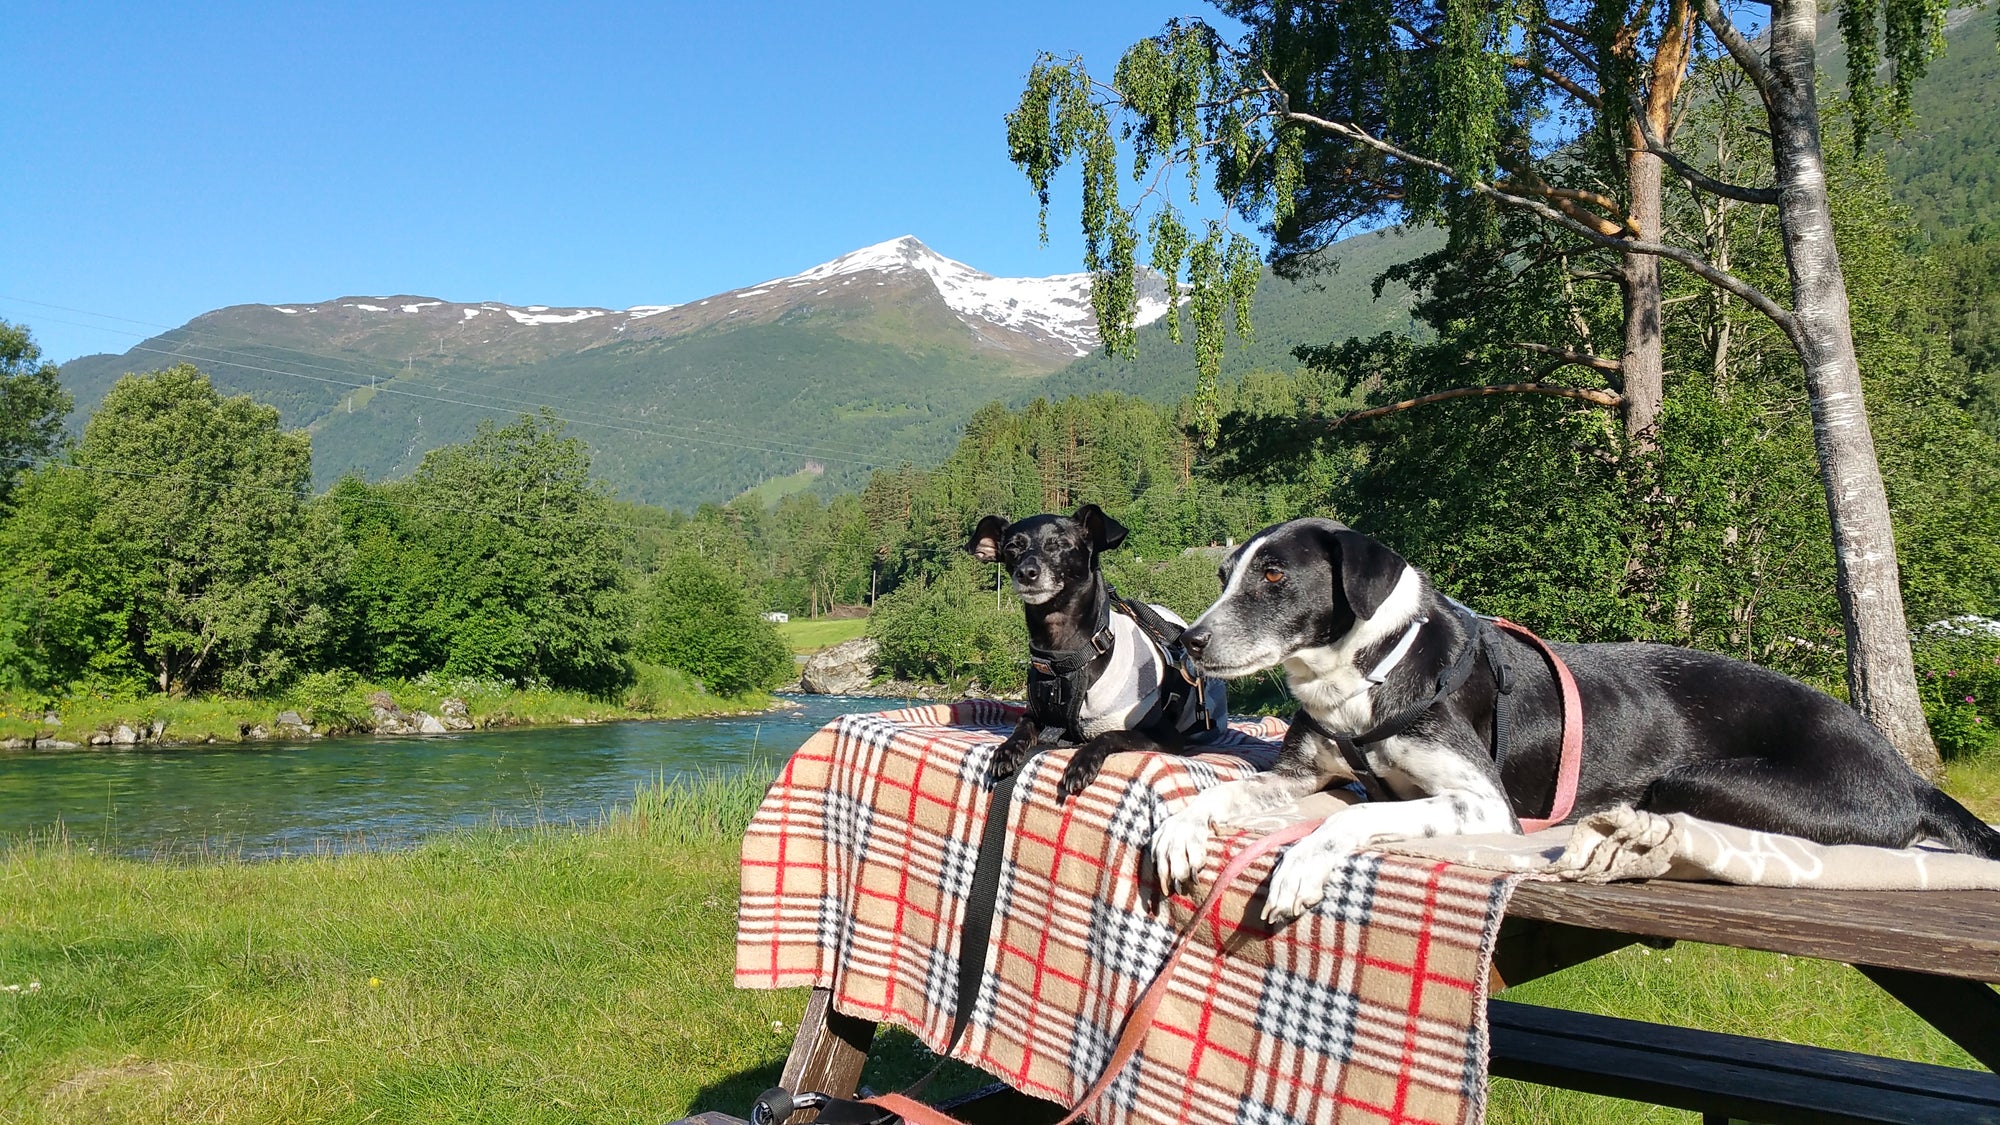 The Pack Track stopped at a campsite in southern Norway beside a river. Weeti and Shadow rested on the picnic table enjoying the sunshine after a long days ride.